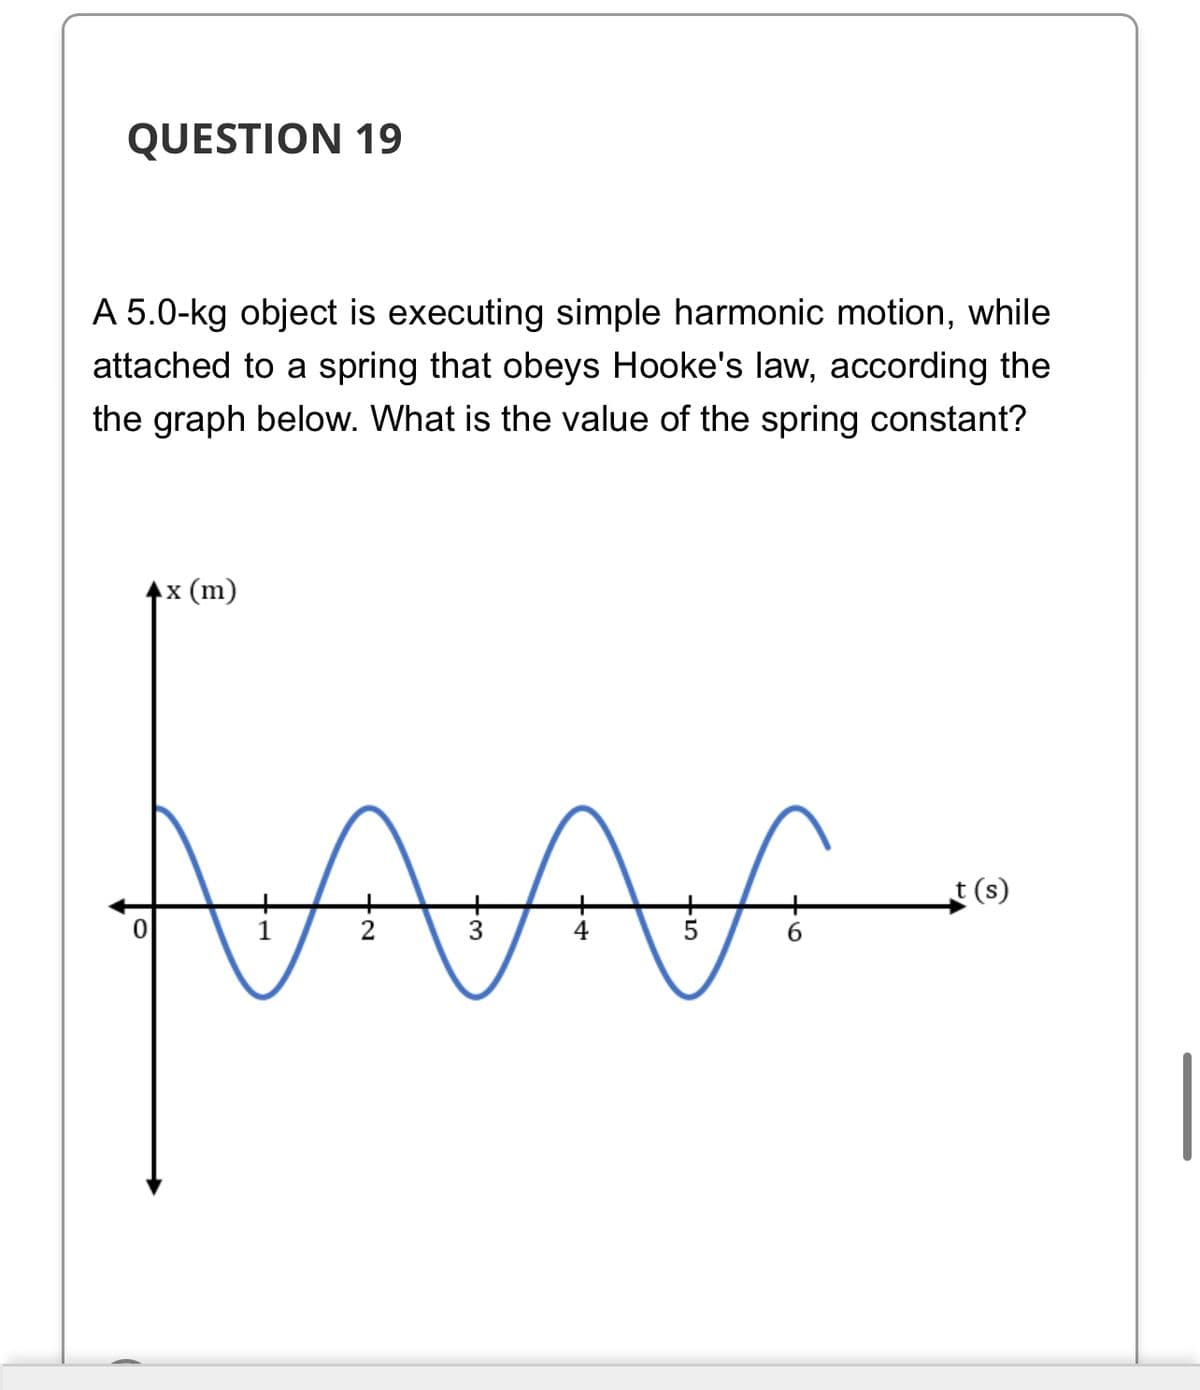 QUESTION 19
A 5.0-kg object is executing simple harmonic motion, while
attached to a spring that obeys Hooke's law, according the
the graph below. What is the value of the spring constant?
x (m)
t (s)
1
